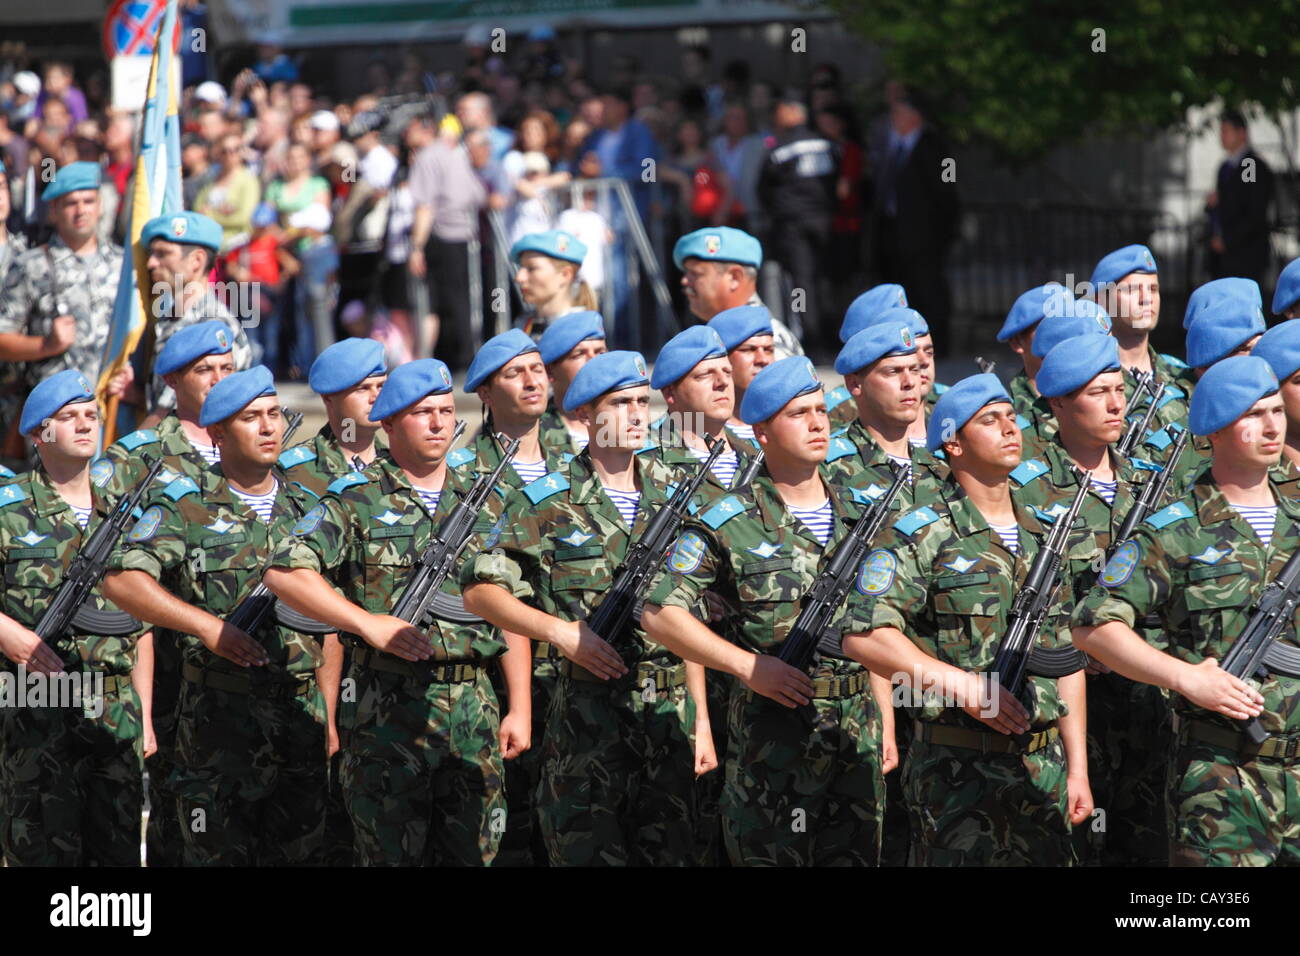 Formation of Bulgarian Special Forces (68th Special Forces Brigade - Spetsnaz) parading on the Bulgarian Army Day. Other than regular land forces, Spetsnaz wear light-blue berets and striped undershirts. Sofia, Bulgaria, 6 May 2012 Stock Photo